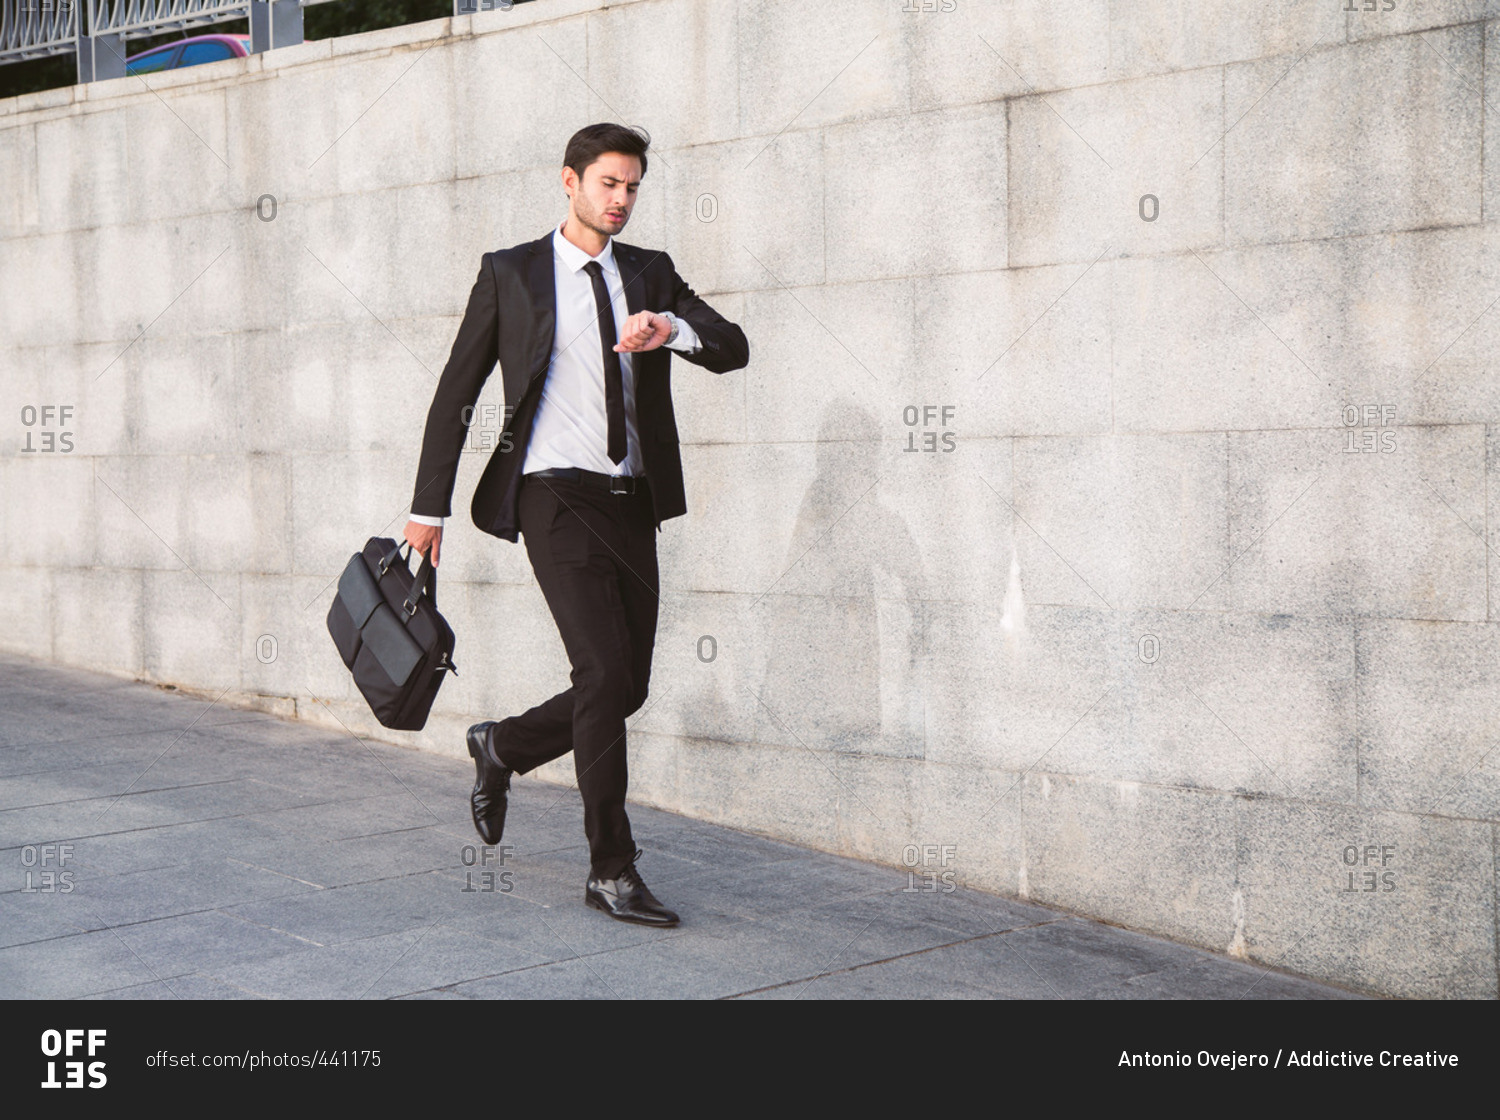 Businessman trying to stop time Stock Photo by ©kantver 69891211